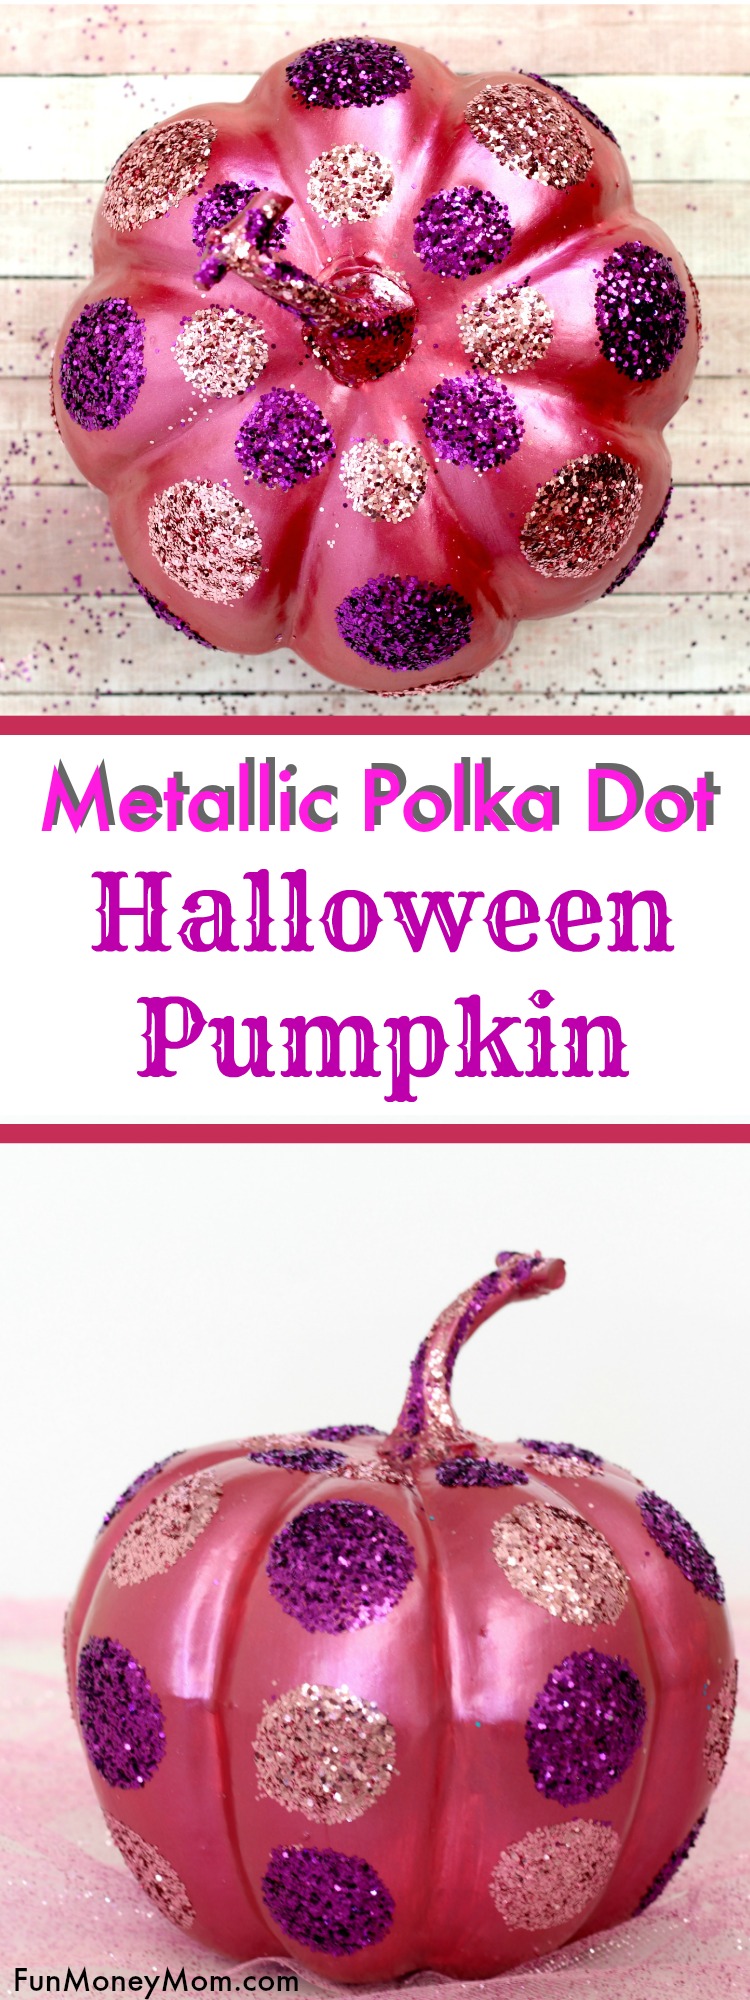 Want a fun pumpkin craft the whole family can make? This polka dot Halloween pumpkin is not only pretty, it's easy enough that the kids can get in on it too!